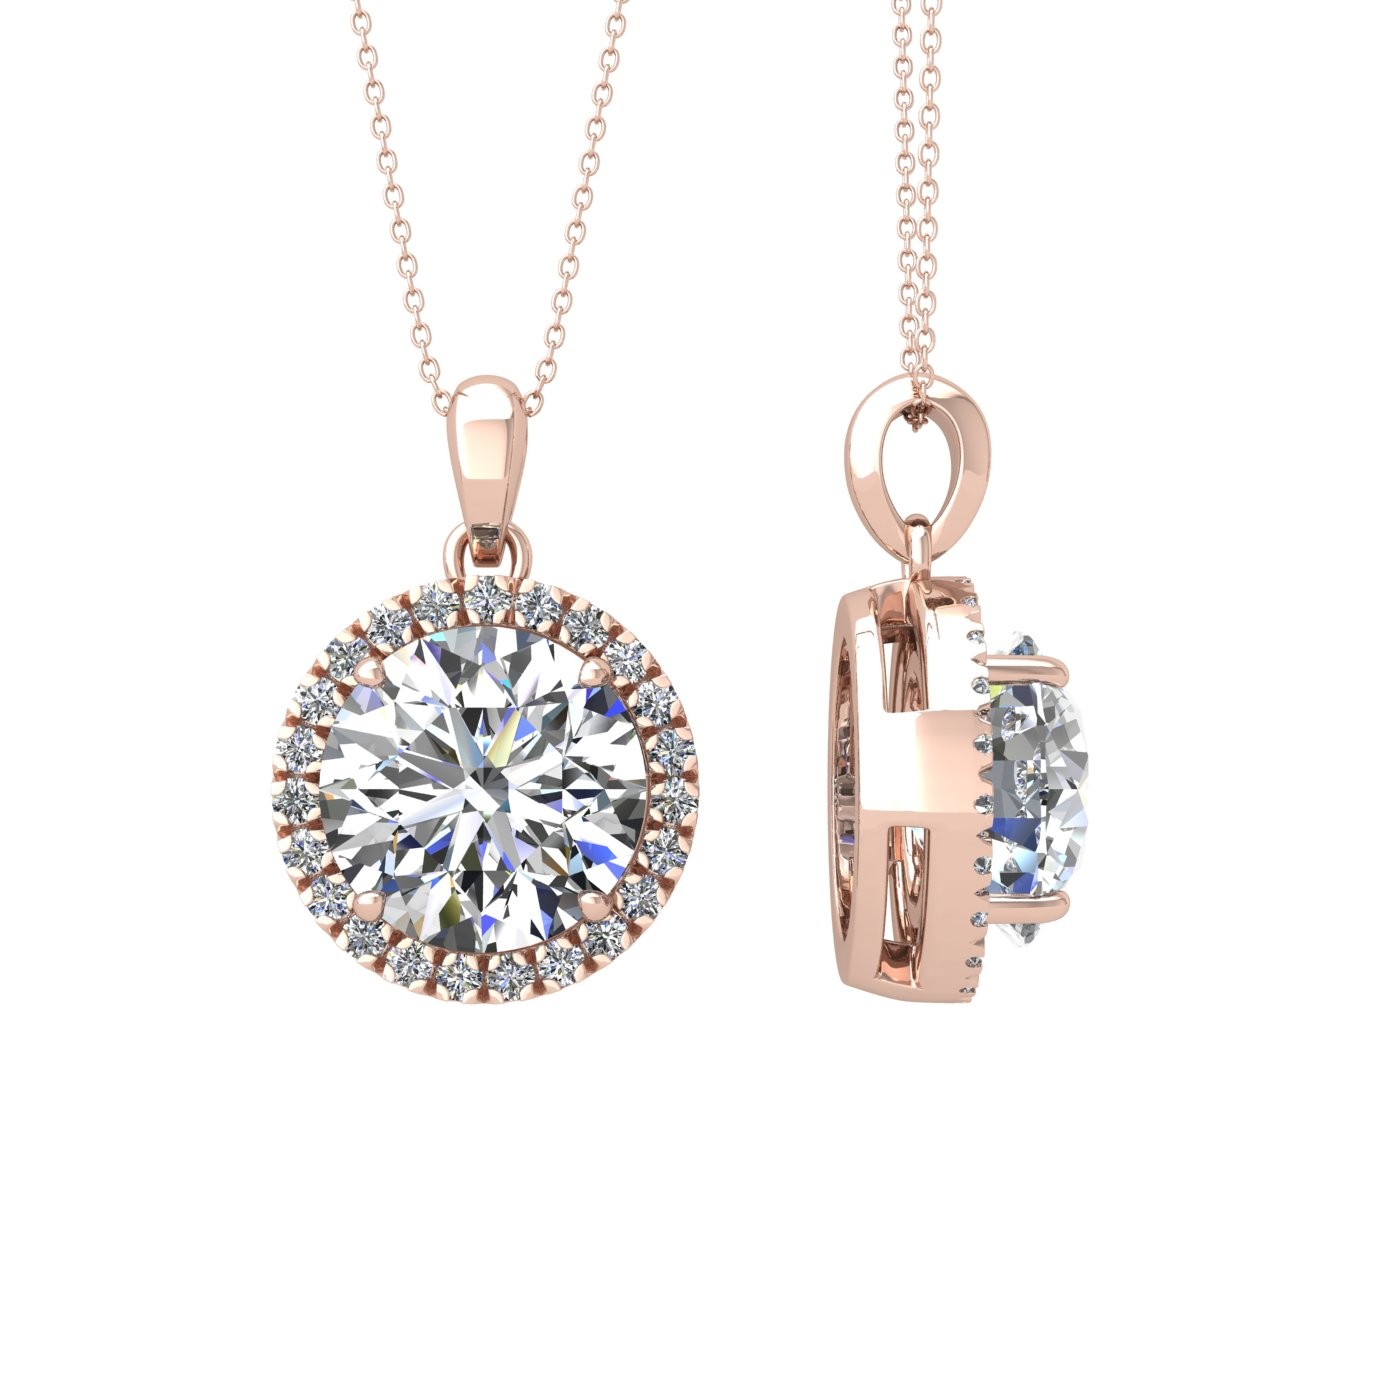 18k rose gold  0,7 ct 4 prong round shape diamond pendant with diamond pavÉ set halo including chain seperate from the pendant Photos & images